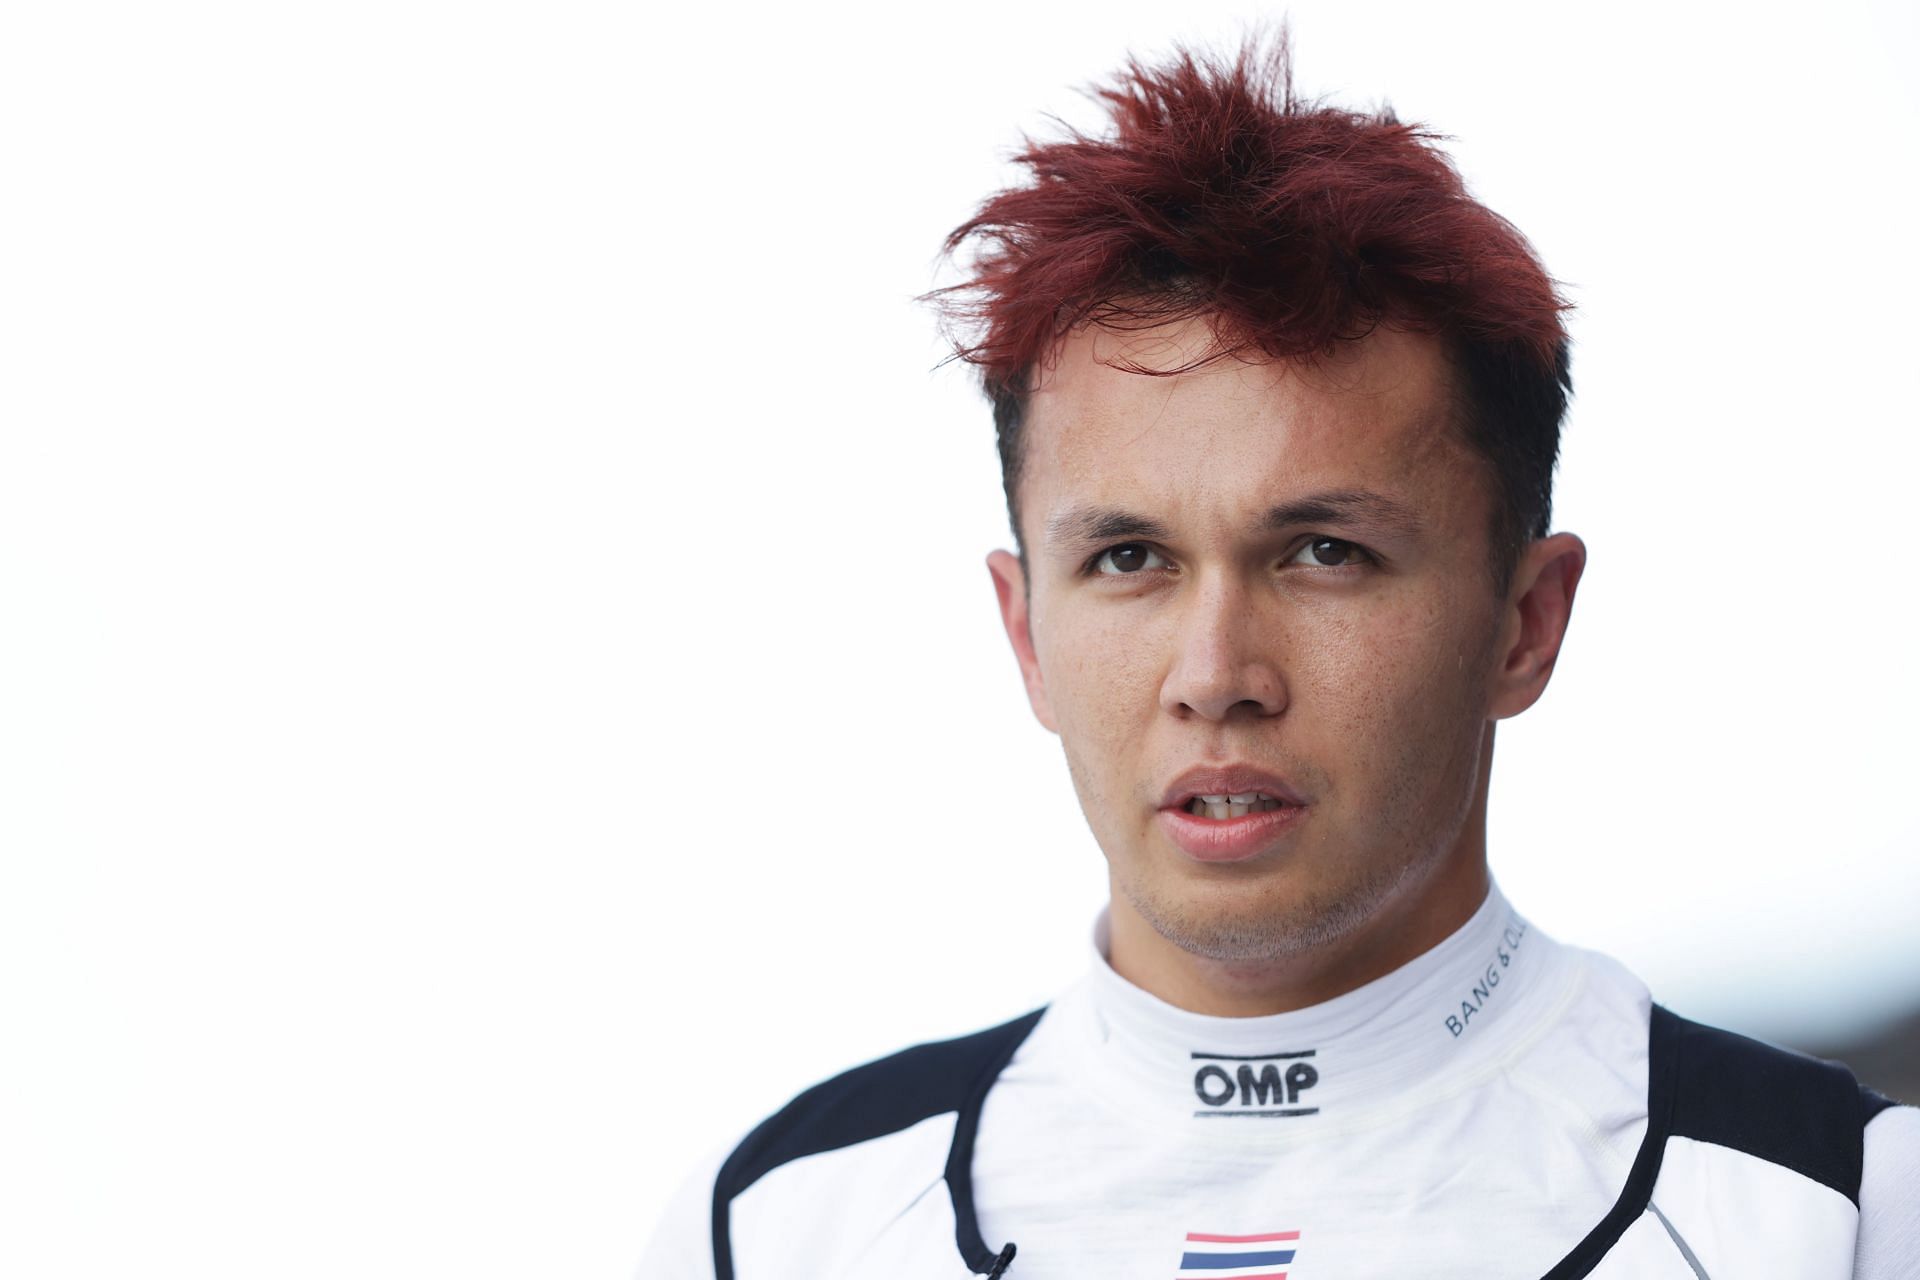 Alex Albon recovered well from a disappointing qualifying at Miami to secure his second points finish of the season